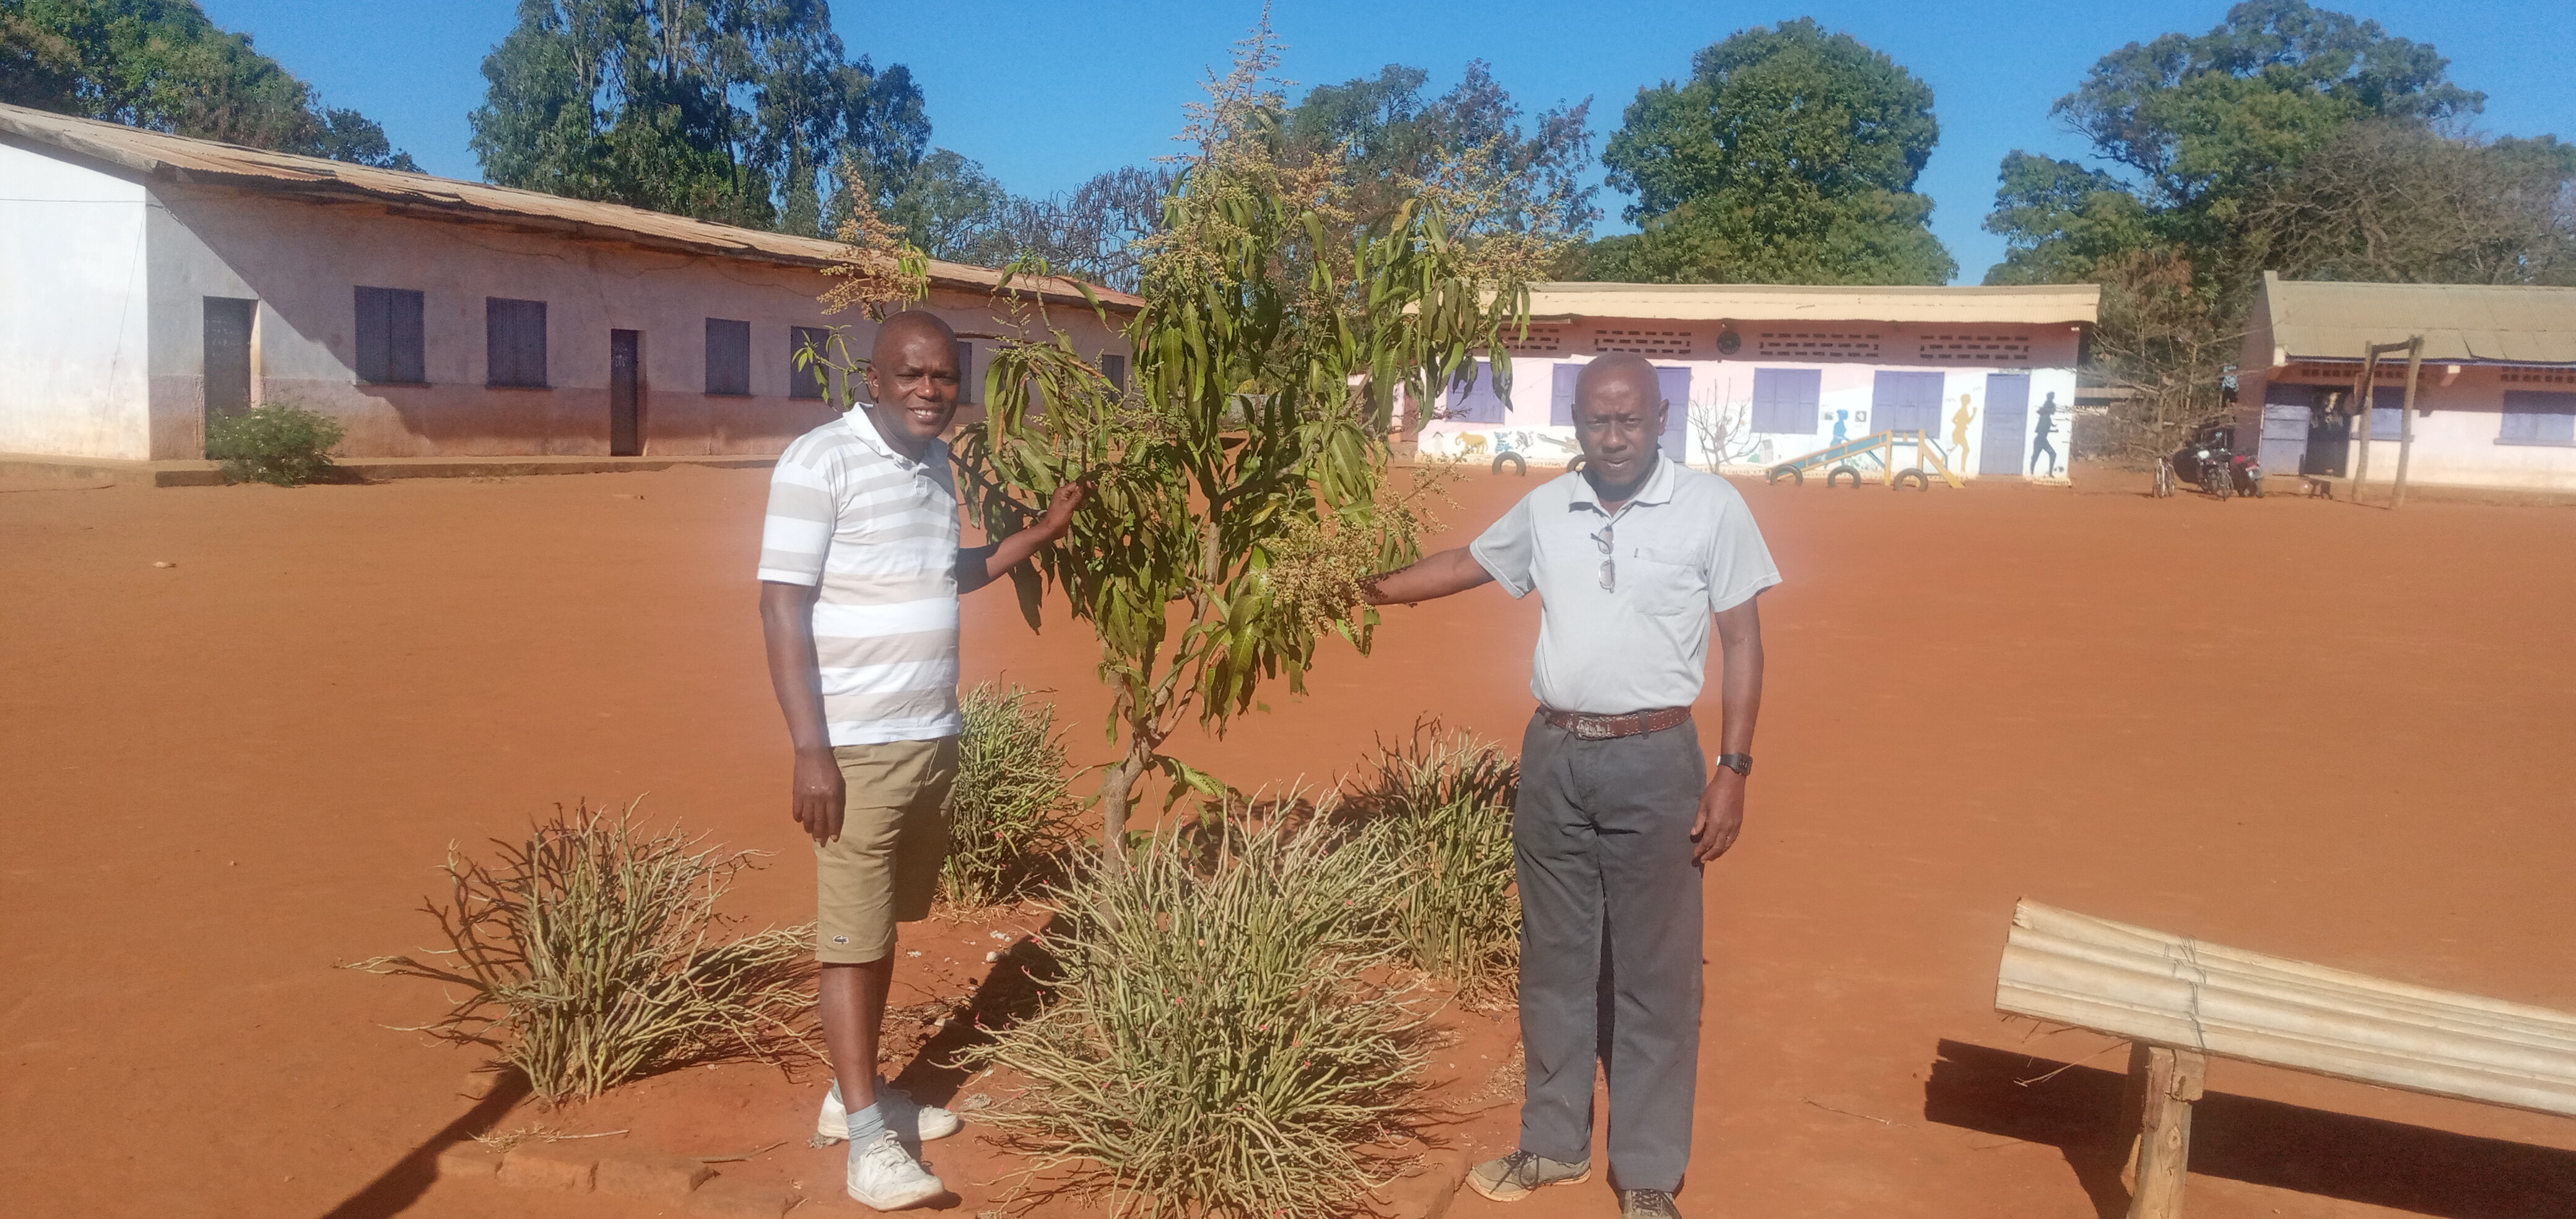 Rolland Razafiarison (L) and the director of the Port Bergé FJKM school with a grafted mango tree at the school Photo by Niaina Raoelison